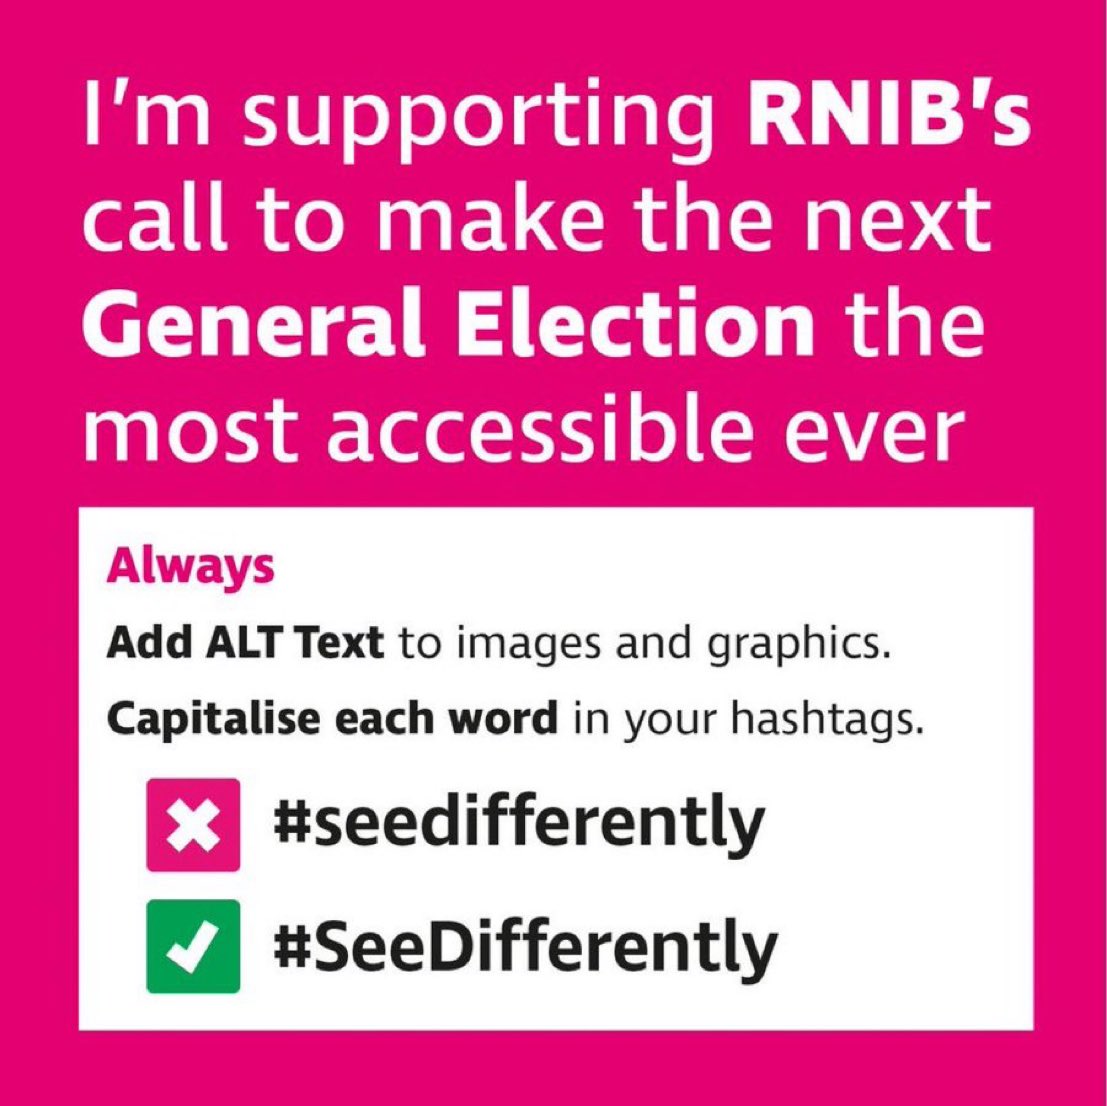 Politics is for everyone. That’s why I’m going to make my online posts accessible for everyone. Thanks to the @RNIB for leading these efforts. #AltTextDay #AddAltText